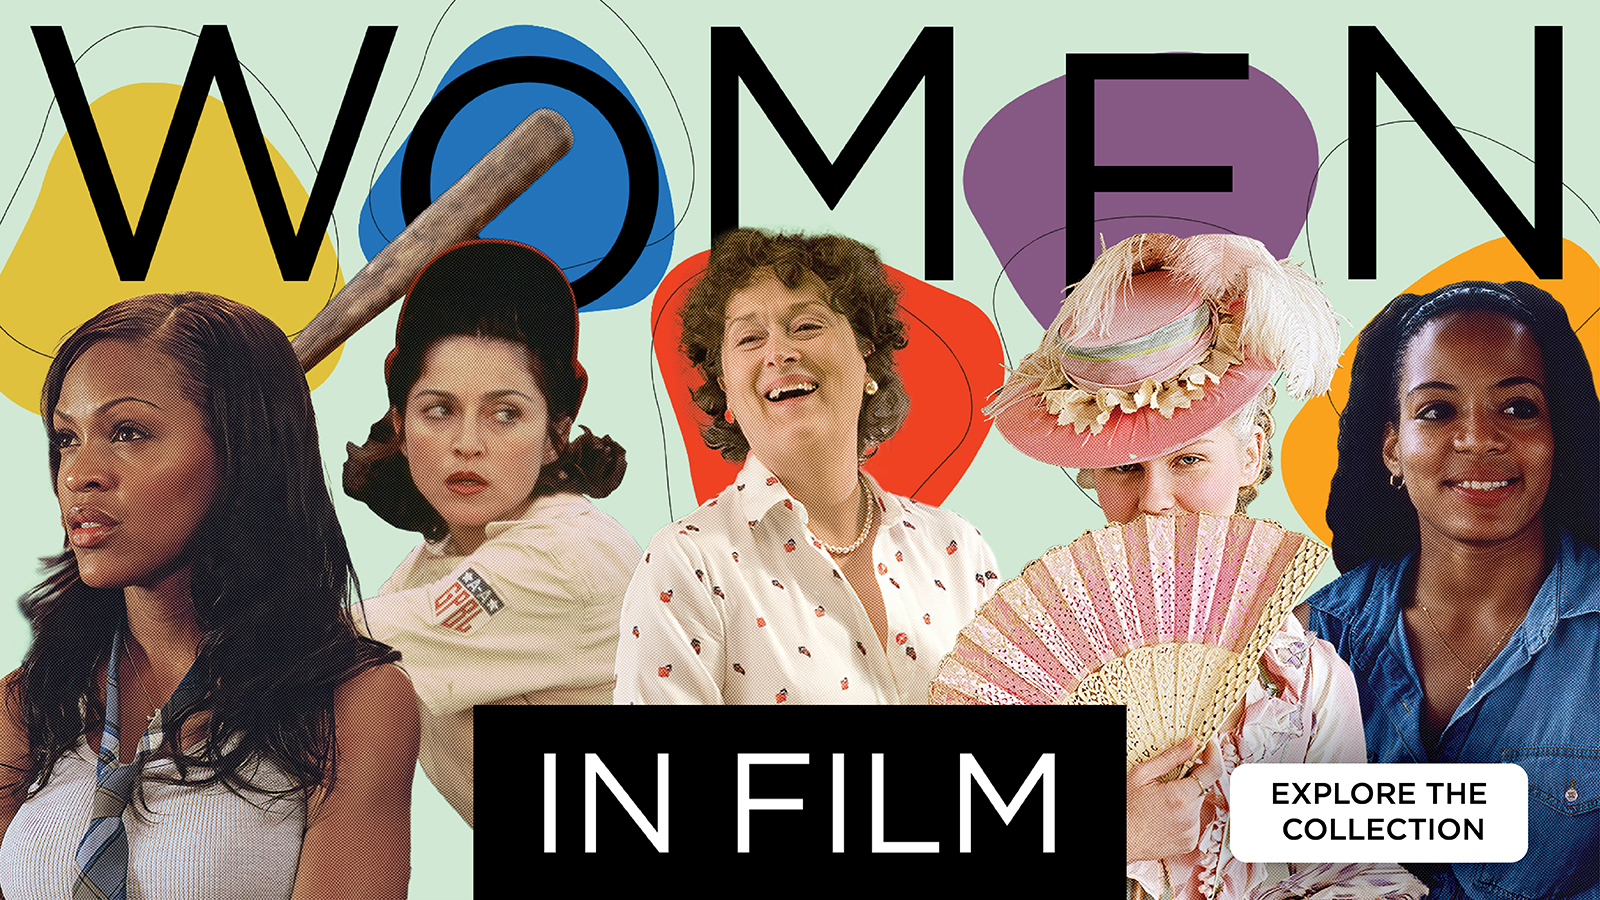 Women in Film - Explore the Collection